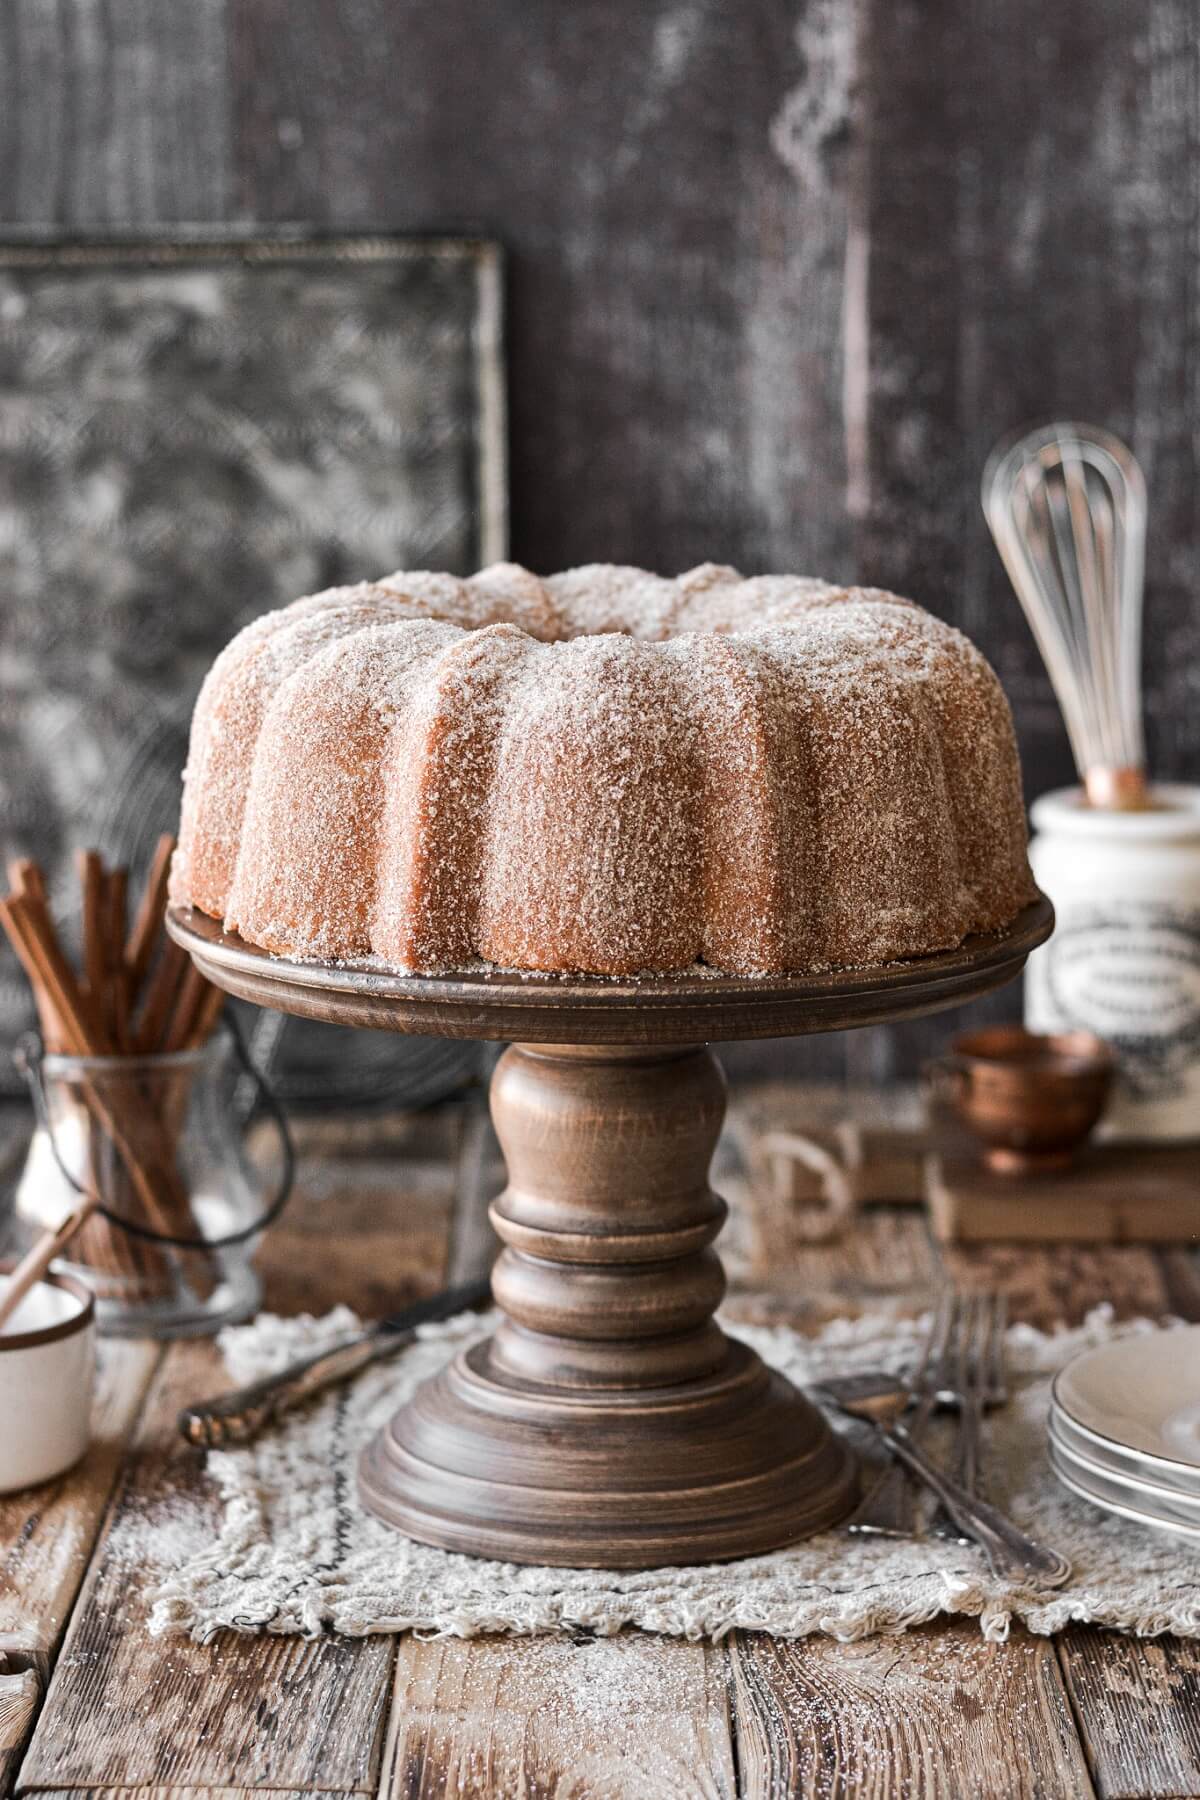 Snickerdoodle bundt cake on a wood cake stand.